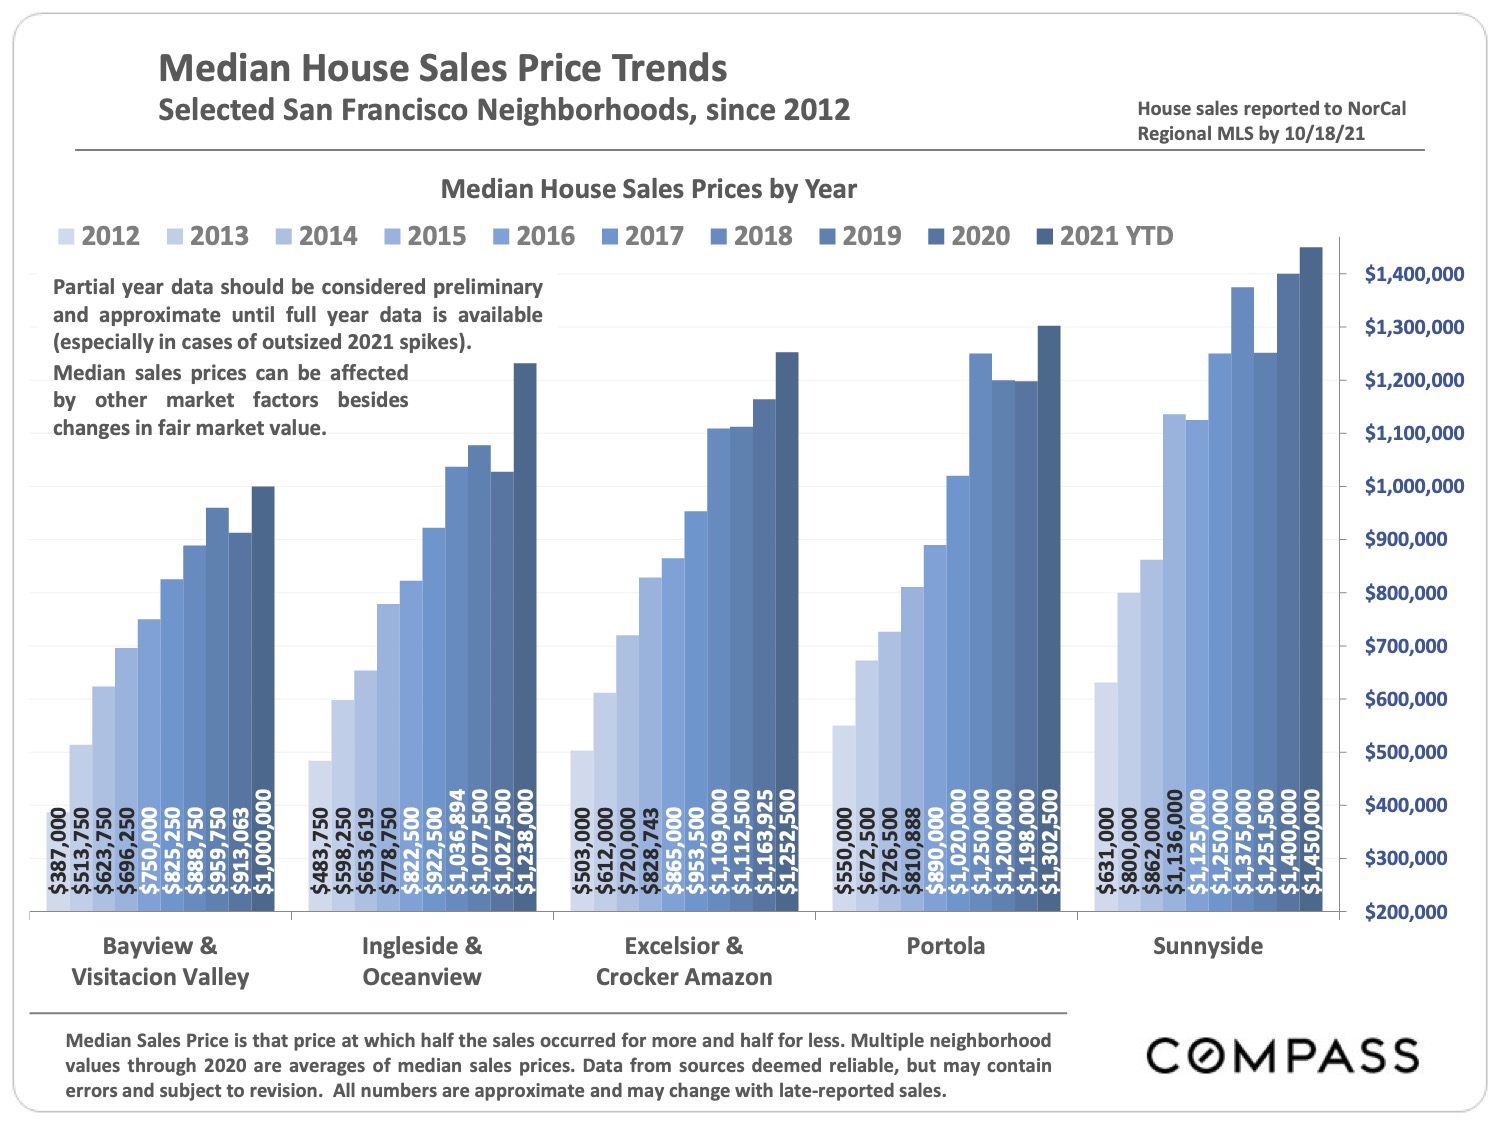 Median House Sales Price Trends Selected San Francisco Neighborhoods since 2012 Bayview and Visitacion Valley Group page 9 of San Francisco Real Estate Market Report November 2021